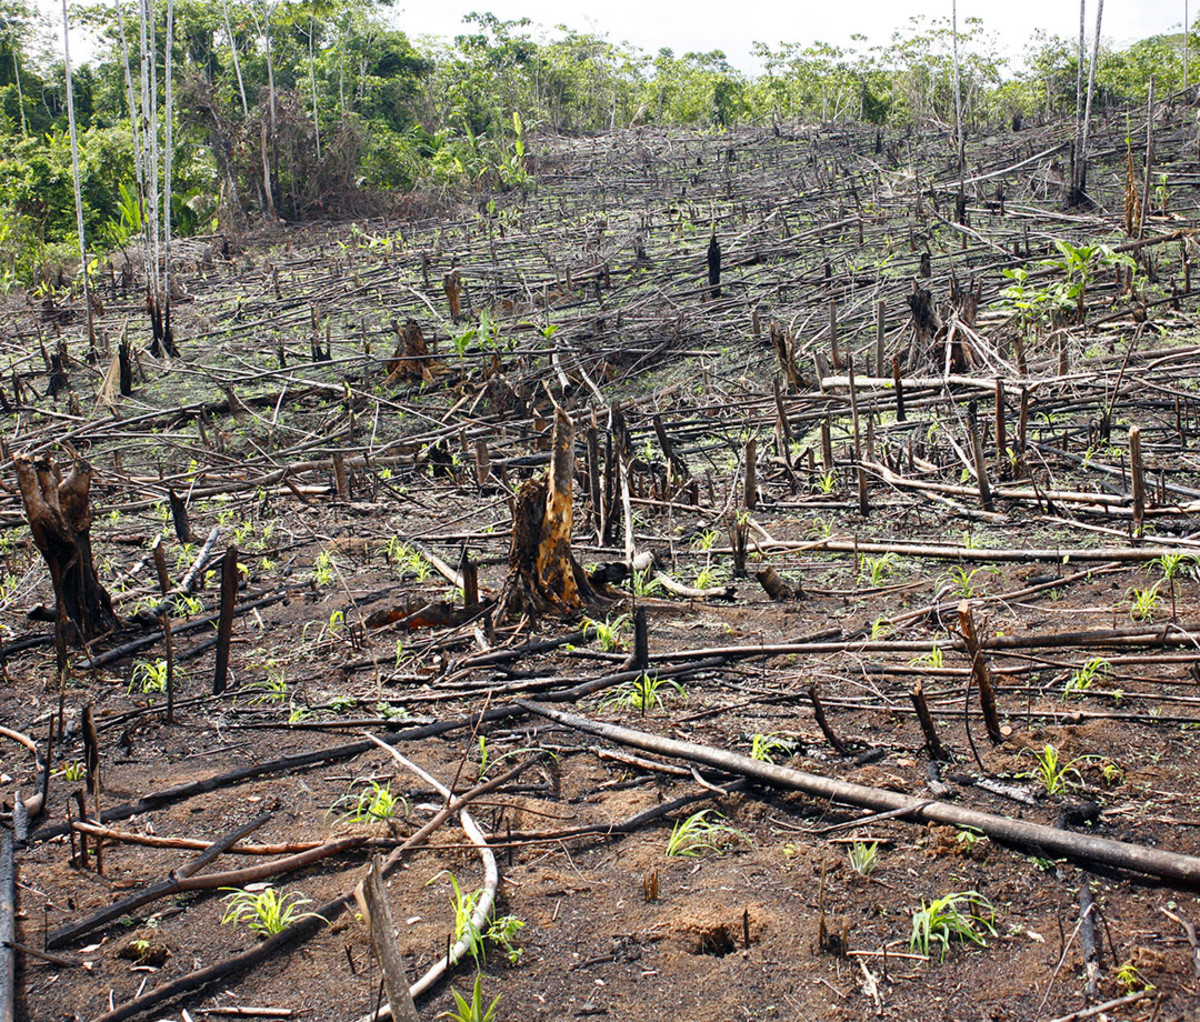 Slash-and-burn agriculture in the Peruvian Amazon, which clears the way for maize cultivation